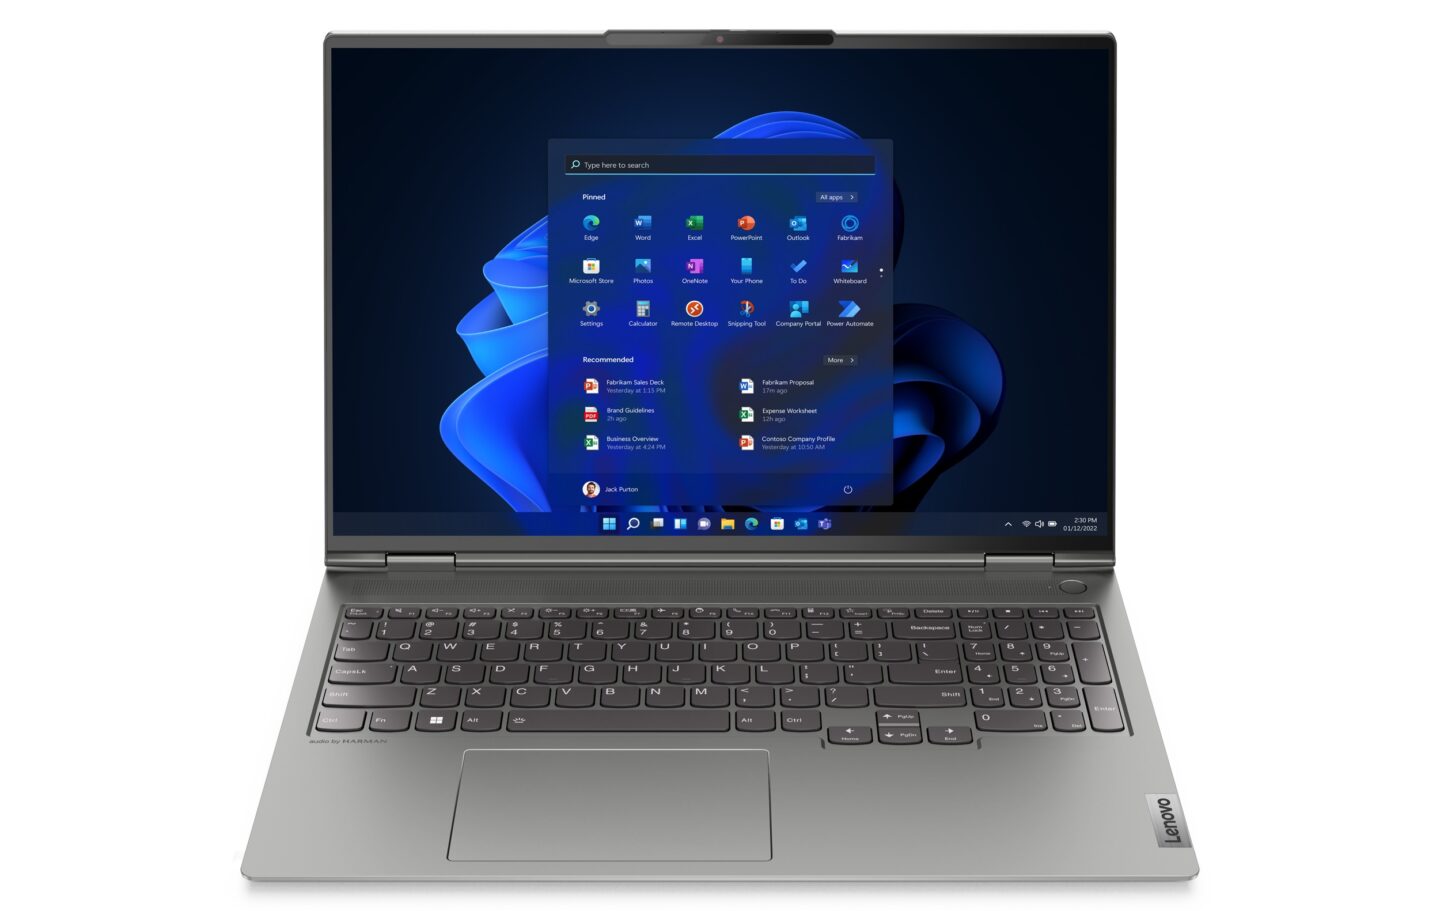 Lenovo introduced the new ThinkBook 16p Gen 3 laptop